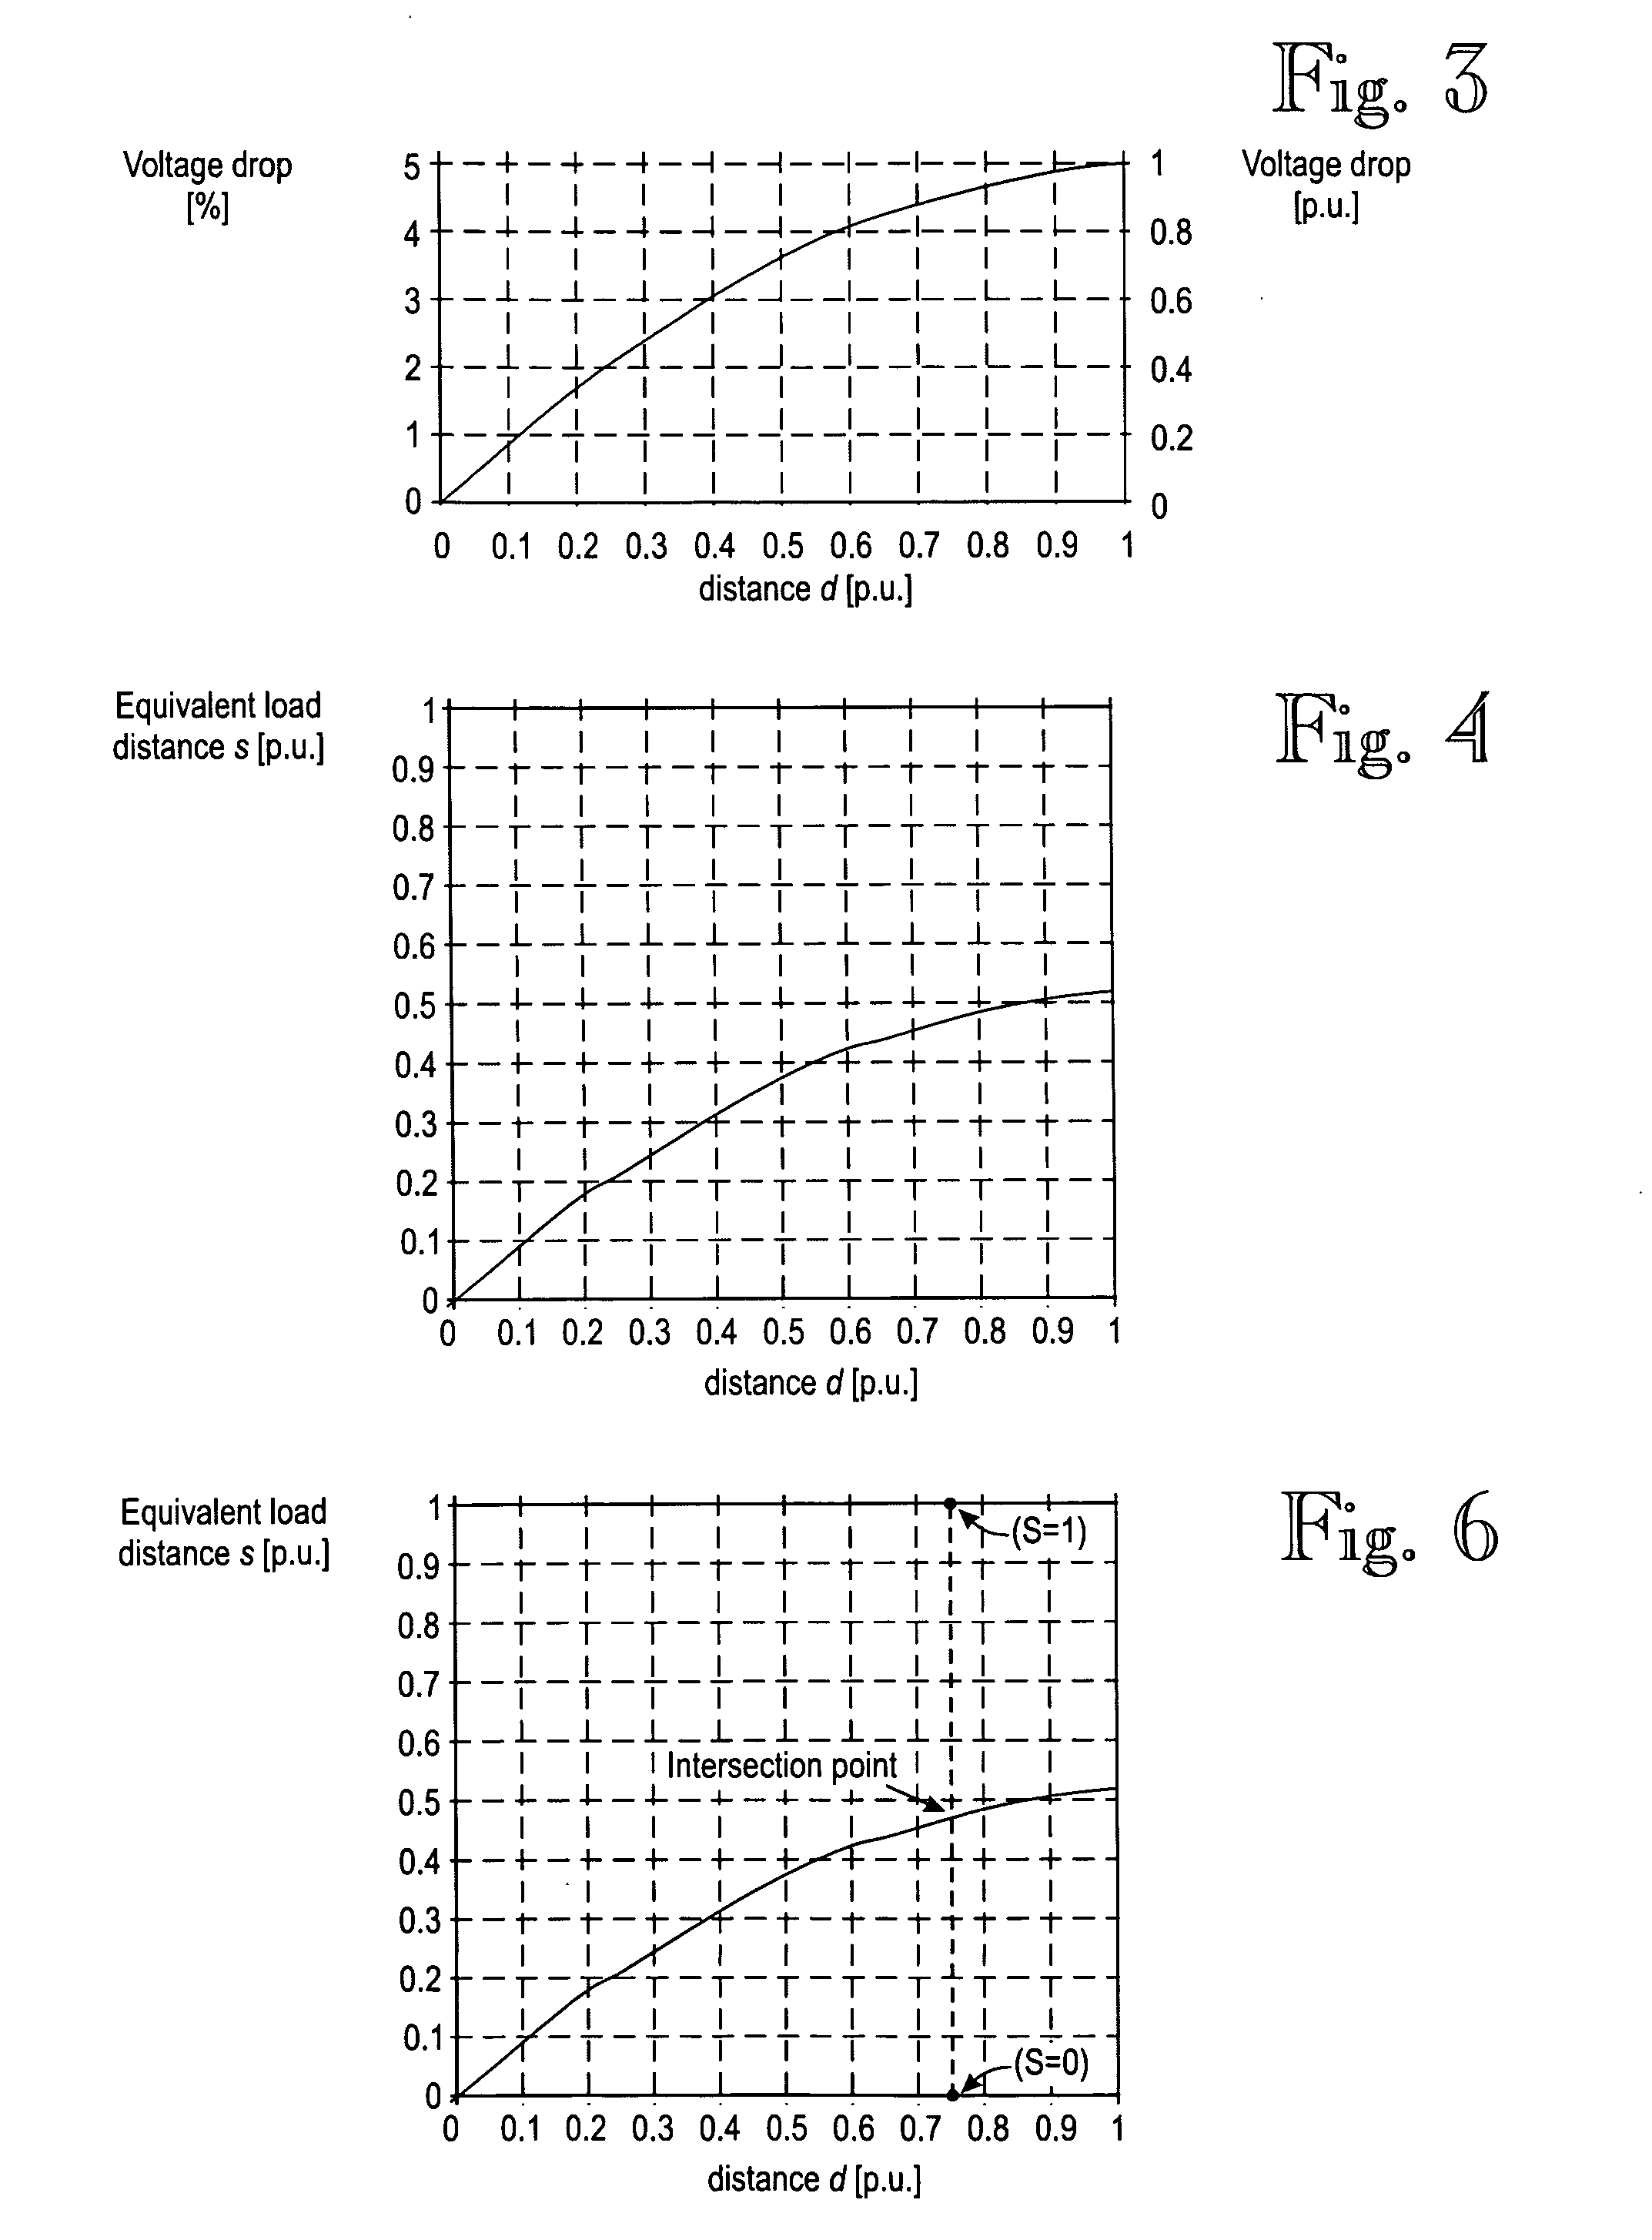 Method for determining location of phase-to earth fault